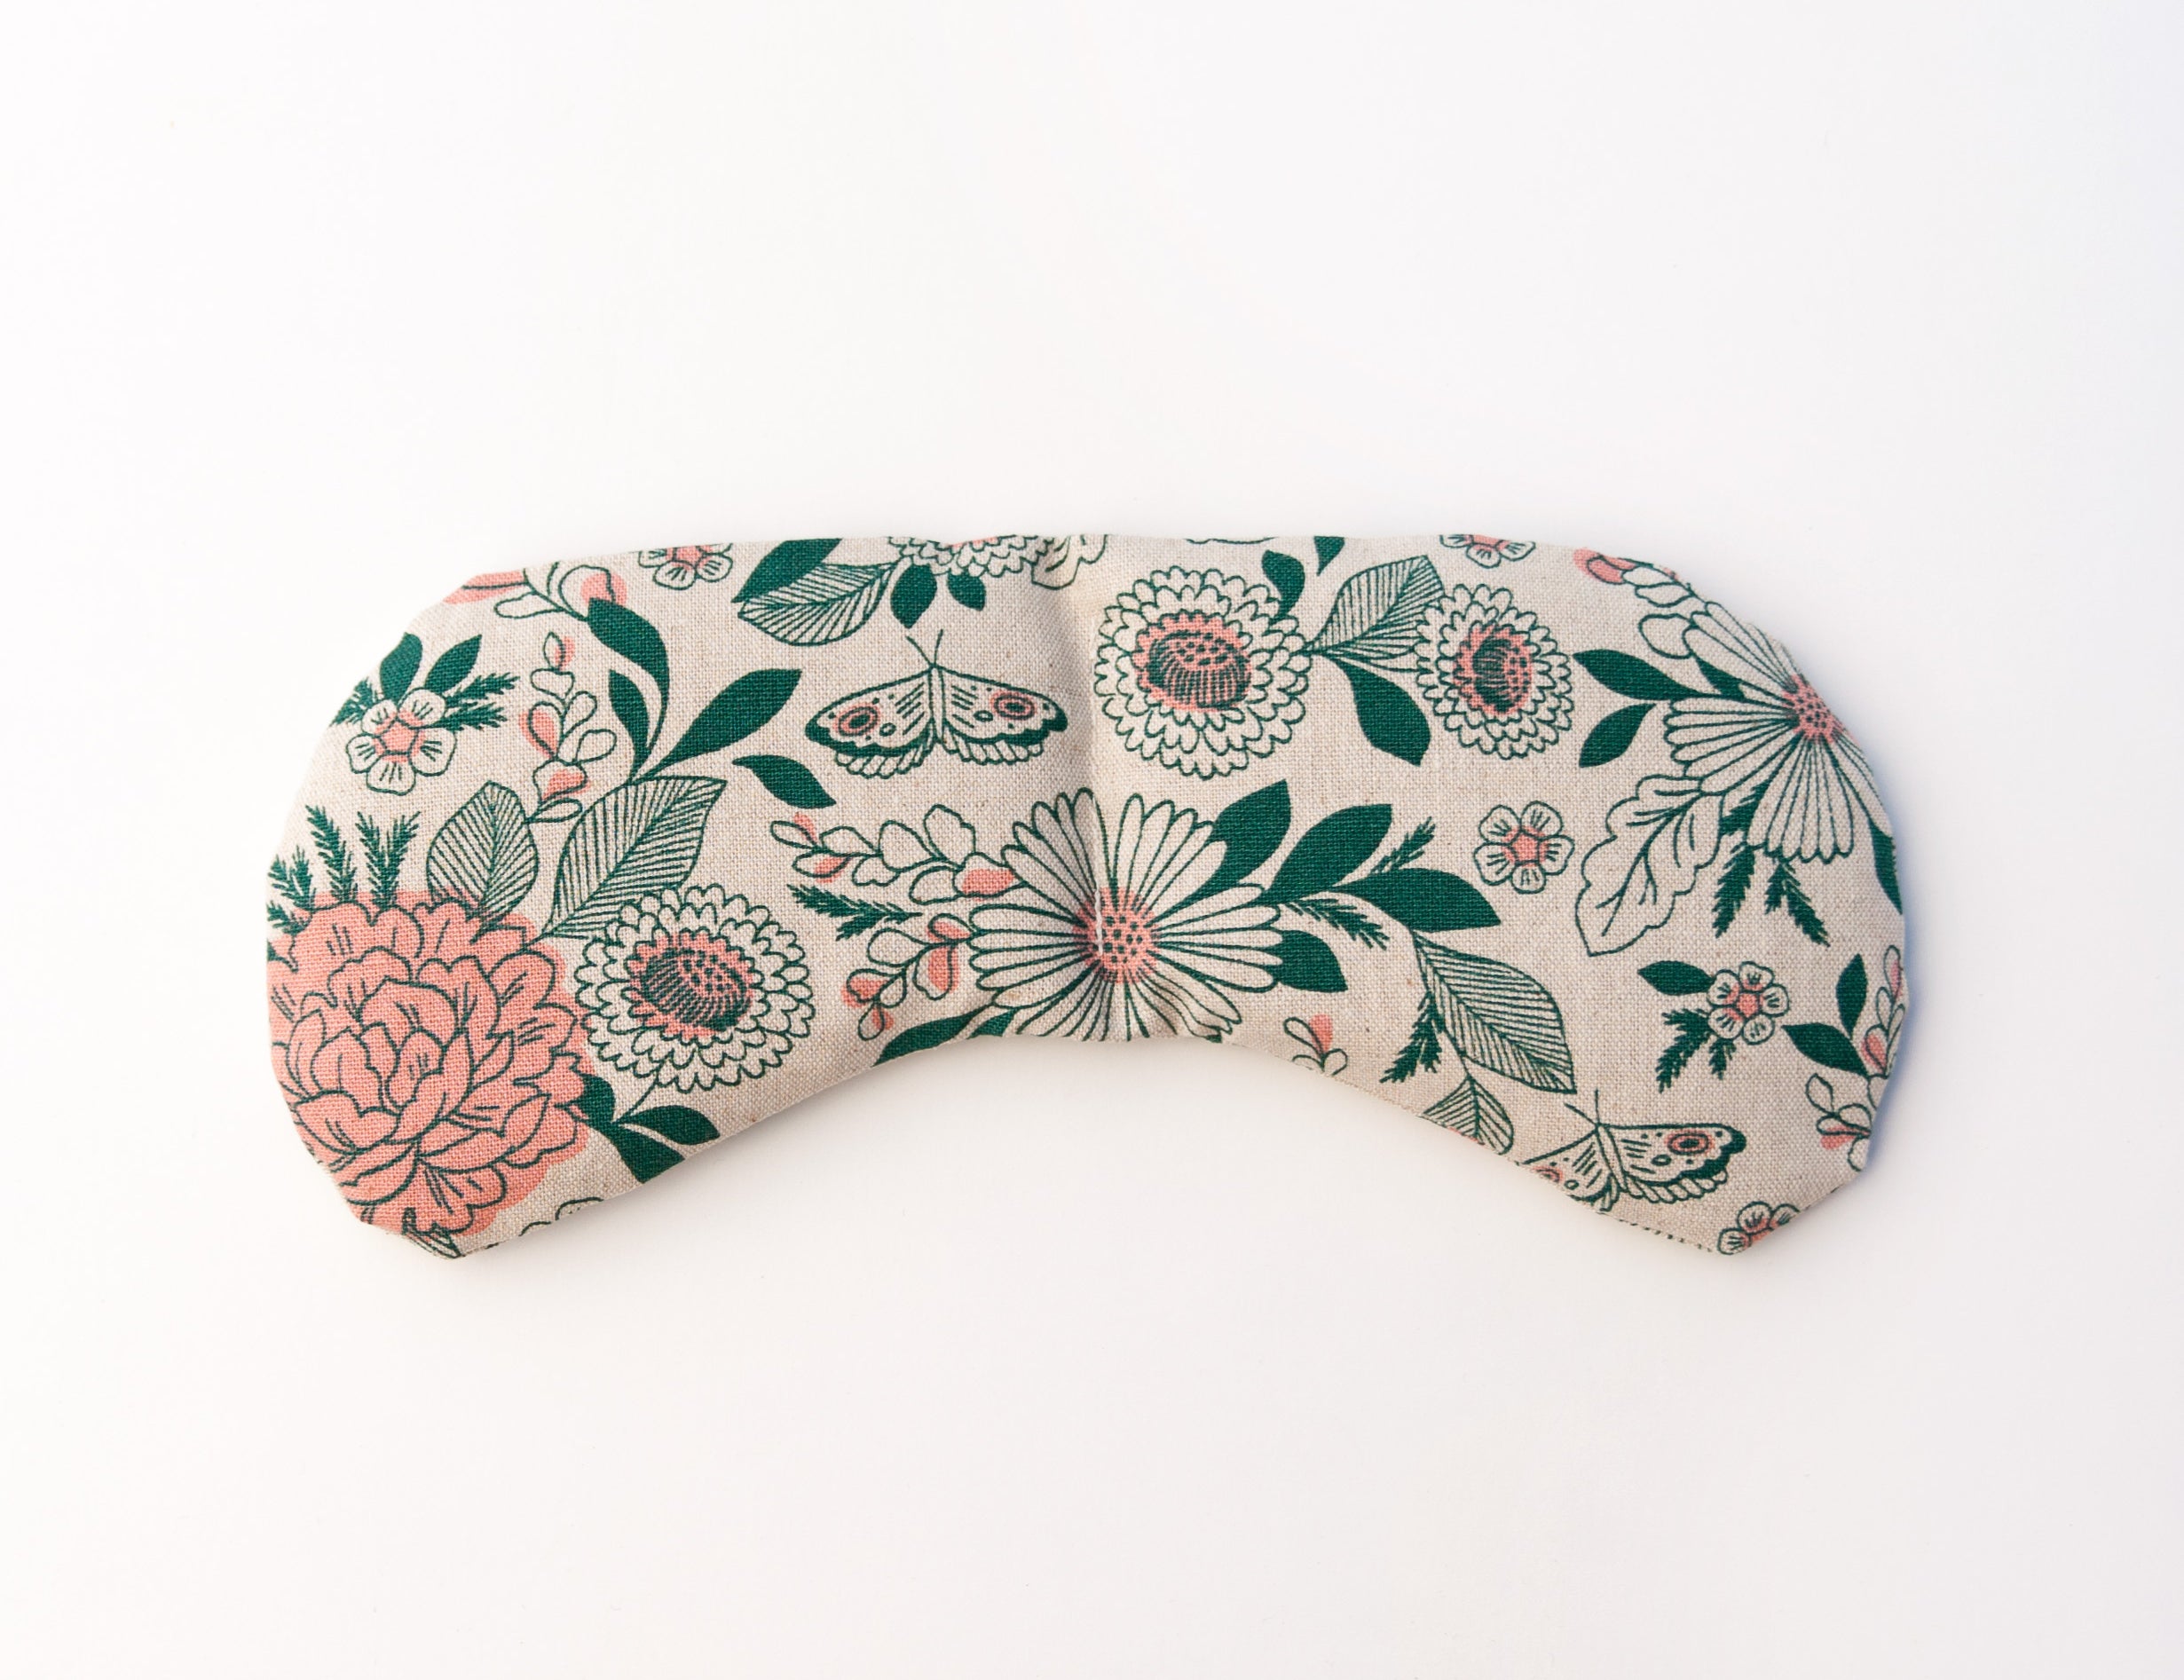 Migraine Mask by Slow North. Strap free cotton weighted eye pillow to be used hot or cold to sooth headaches and tired eyes. Tan and pink and green floral pattern. White background.